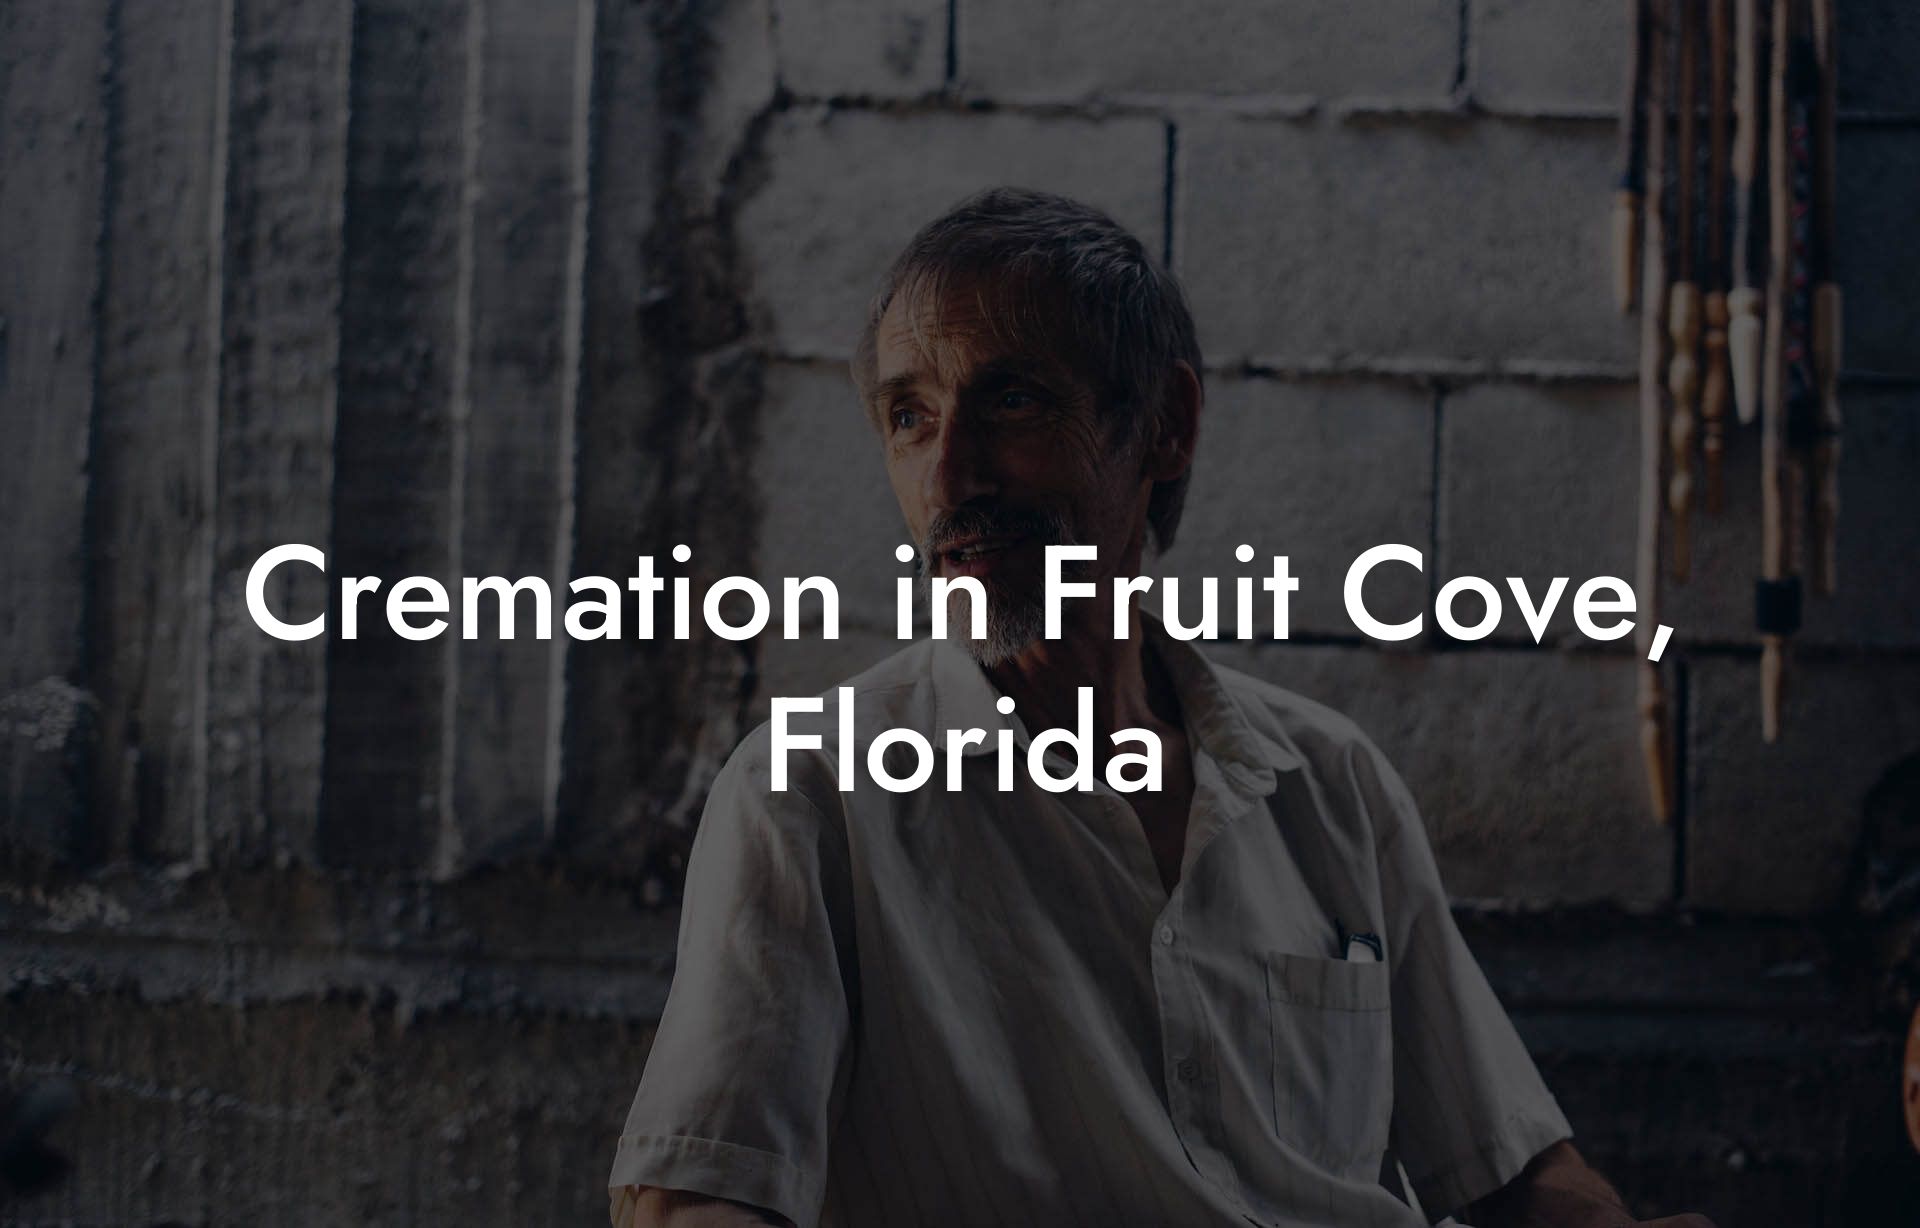 Cremation in Fruit Cove, Florida